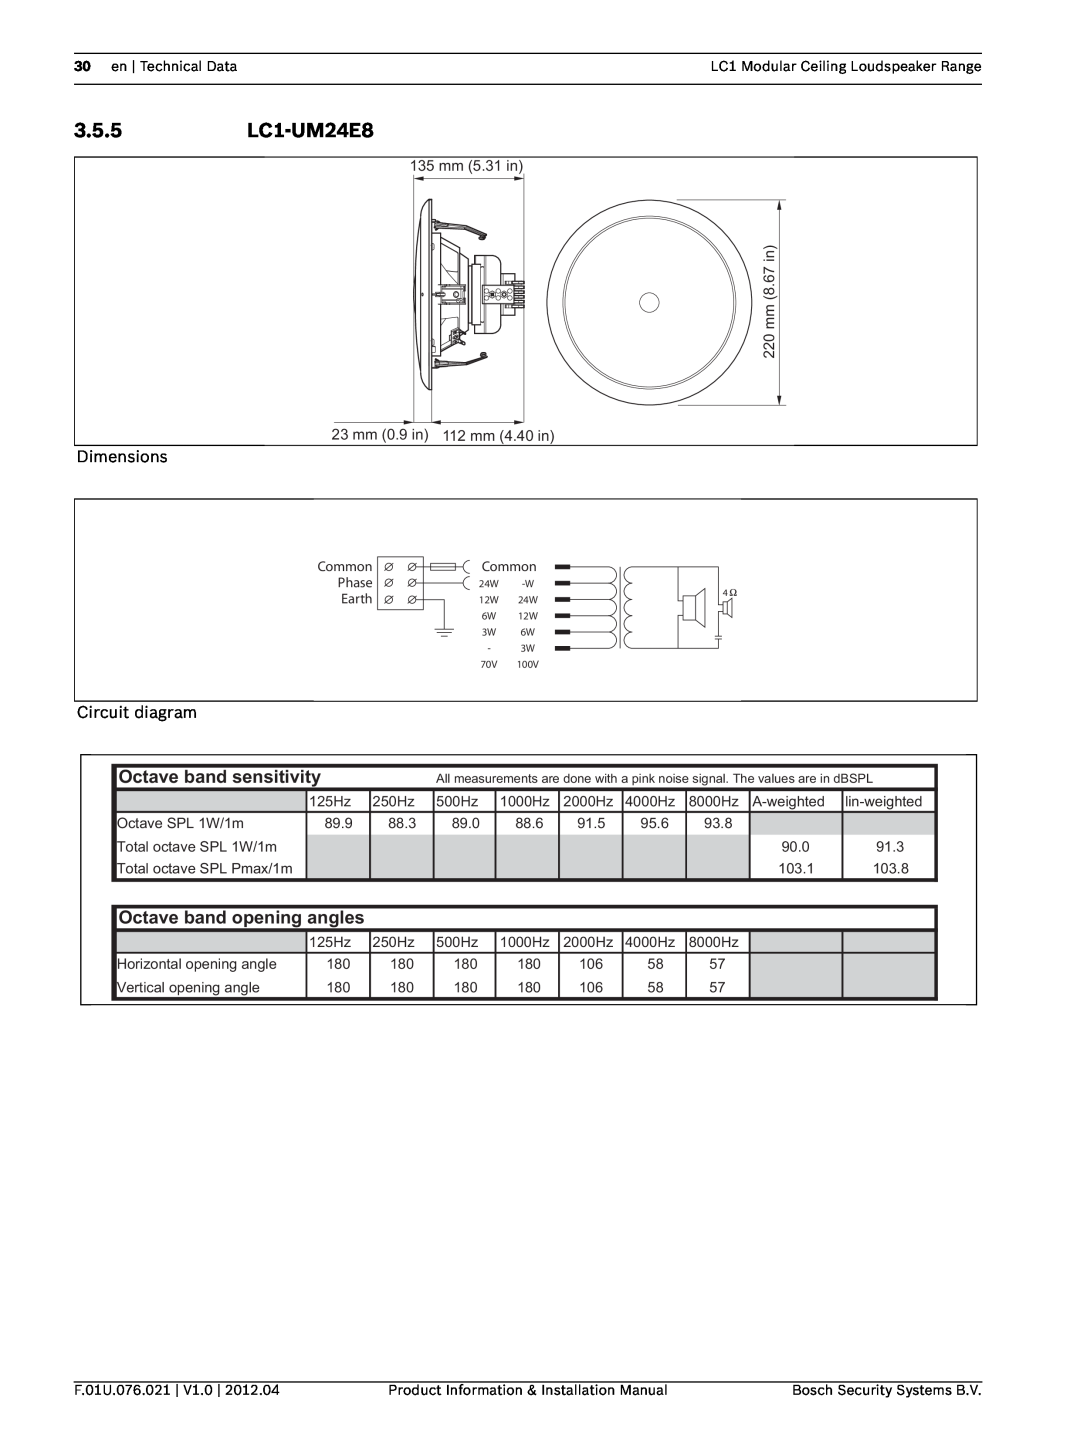 Bosch Appliances installation manual 3.5.5LC1-UM24E8, Octave band sensitivity, Octave band opening angles 